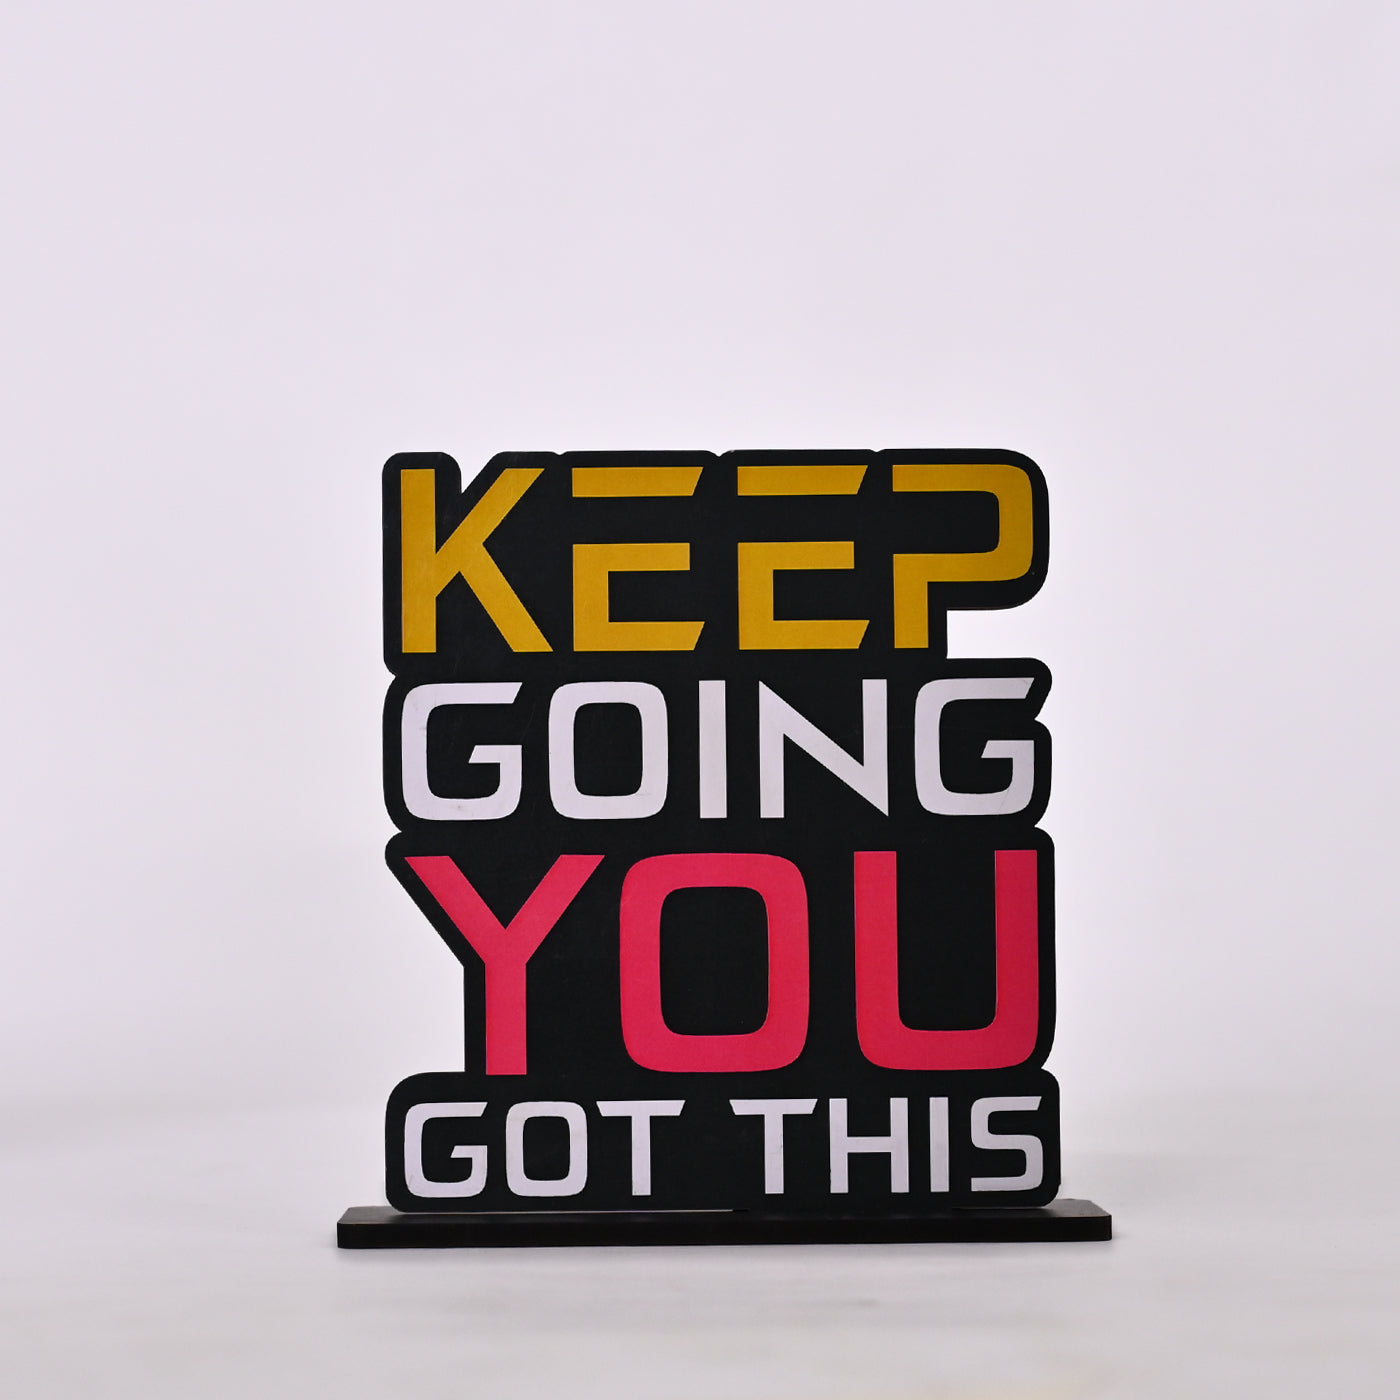 Keep Going You Got This Wooden Table Decor